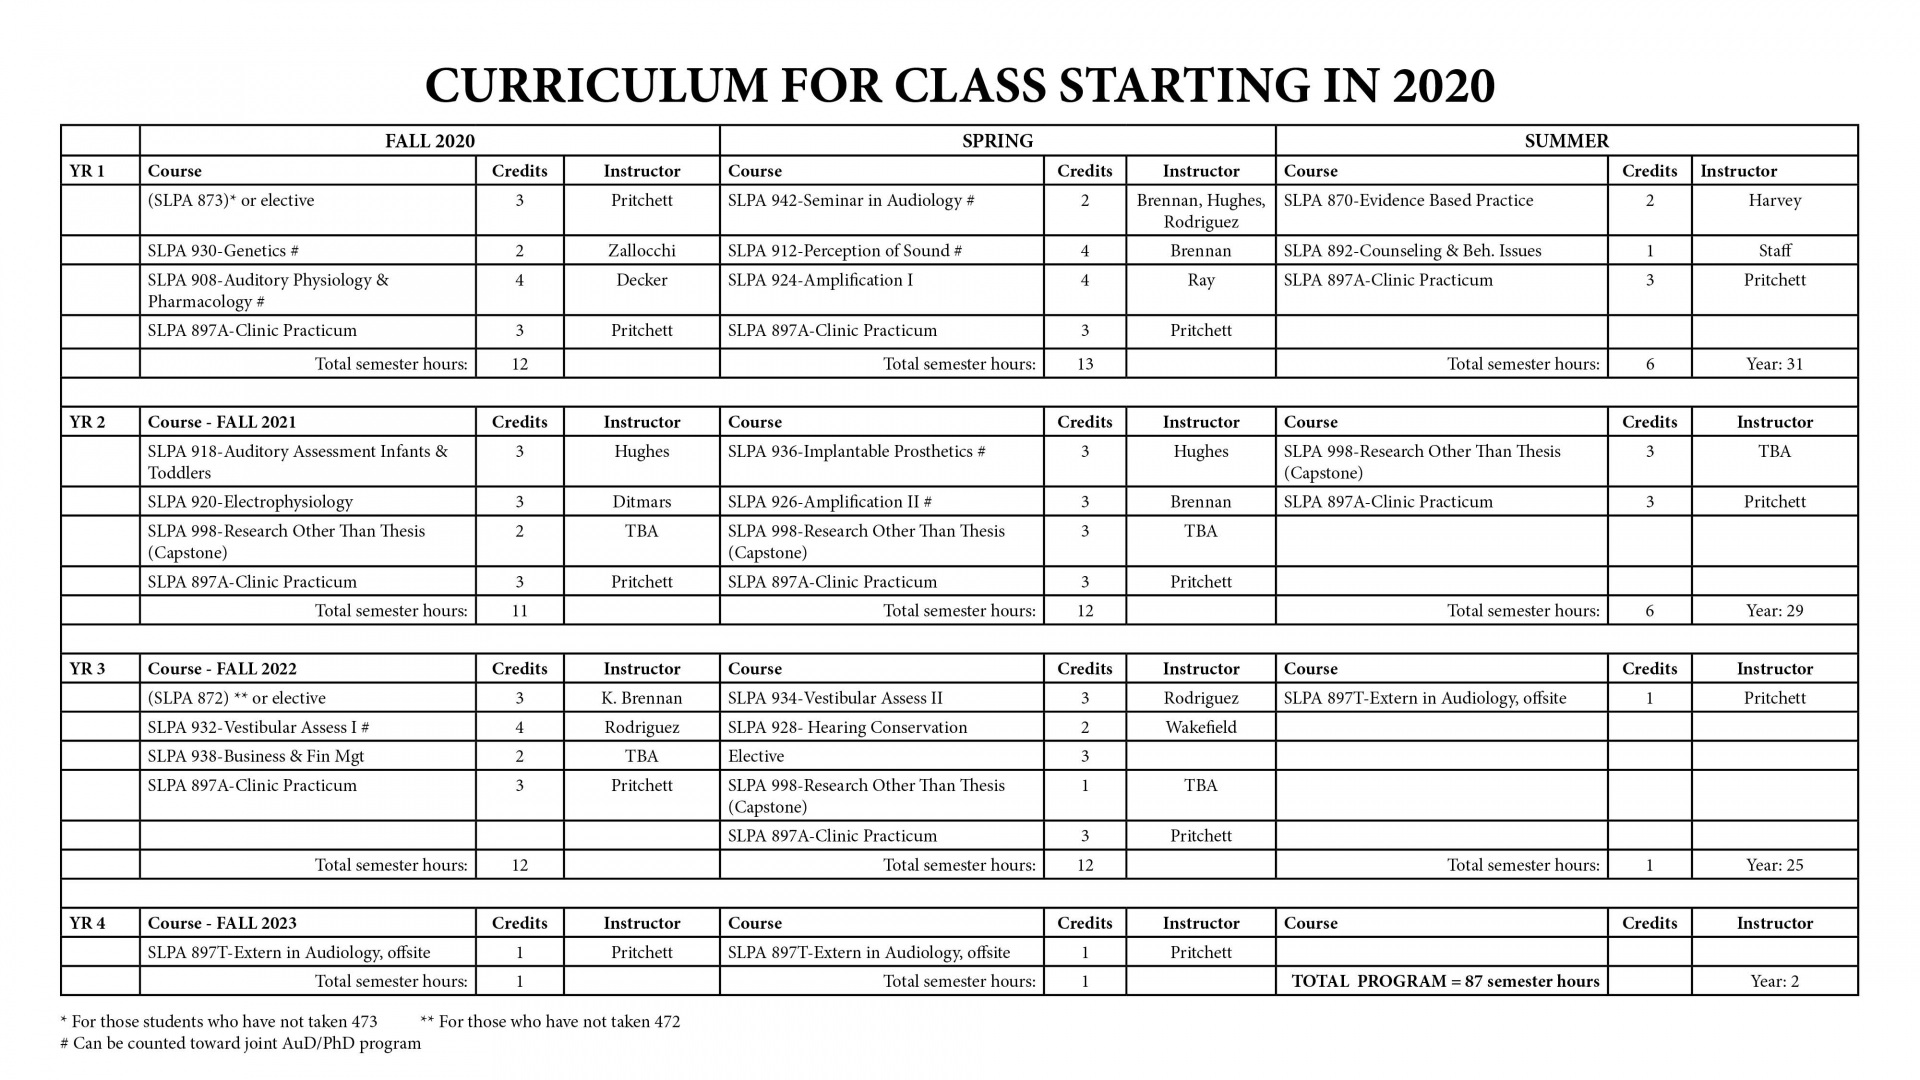 Curriculum for Class Starting in 2020